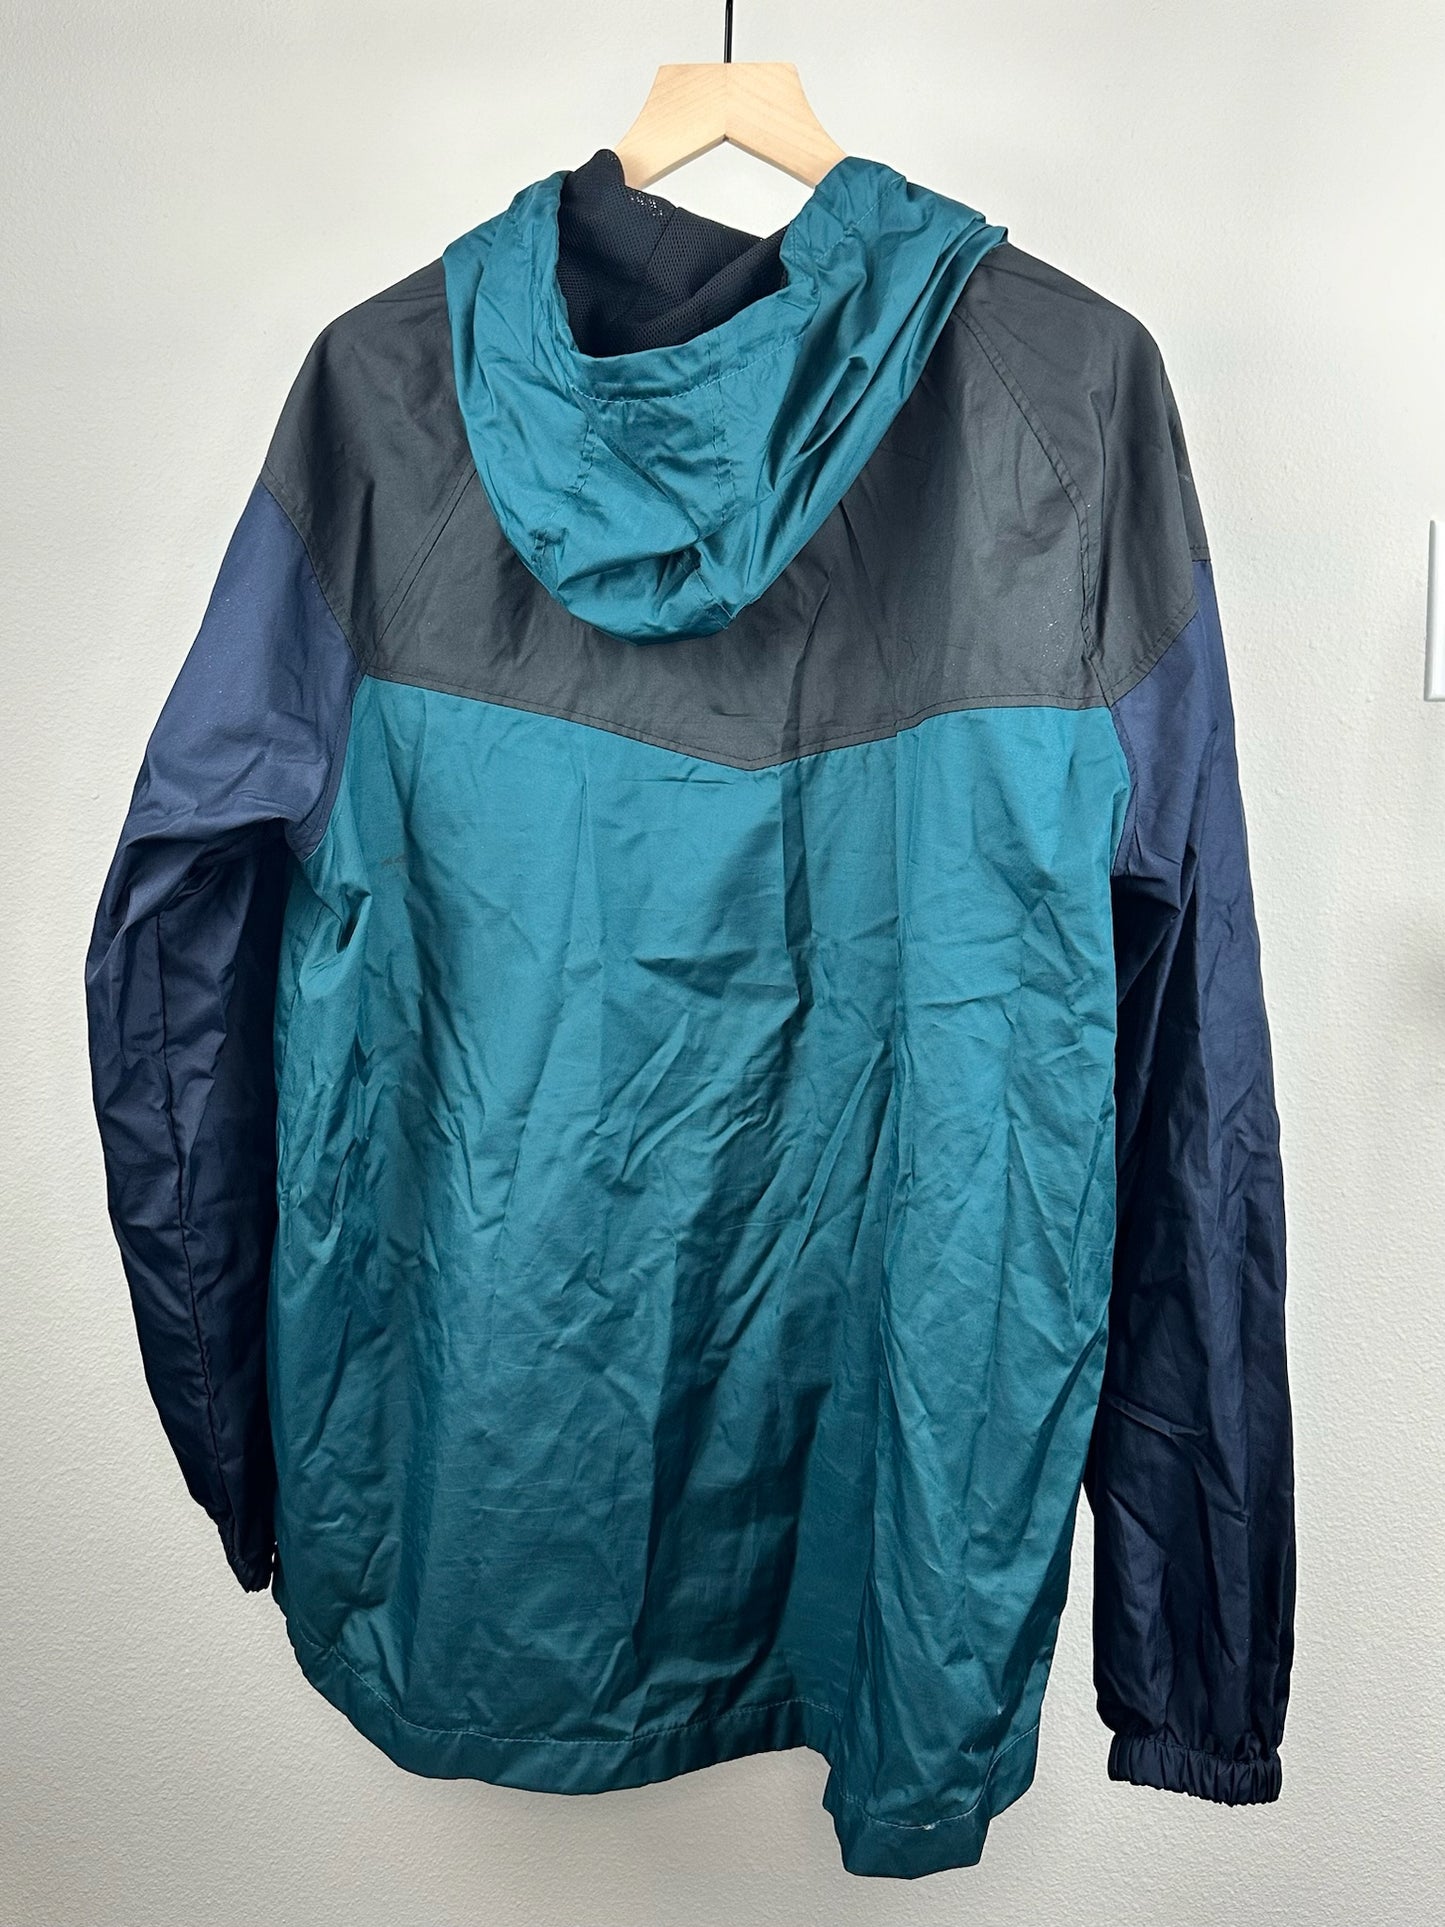 Mens Blue/Green Nylon Jacket by Distortion